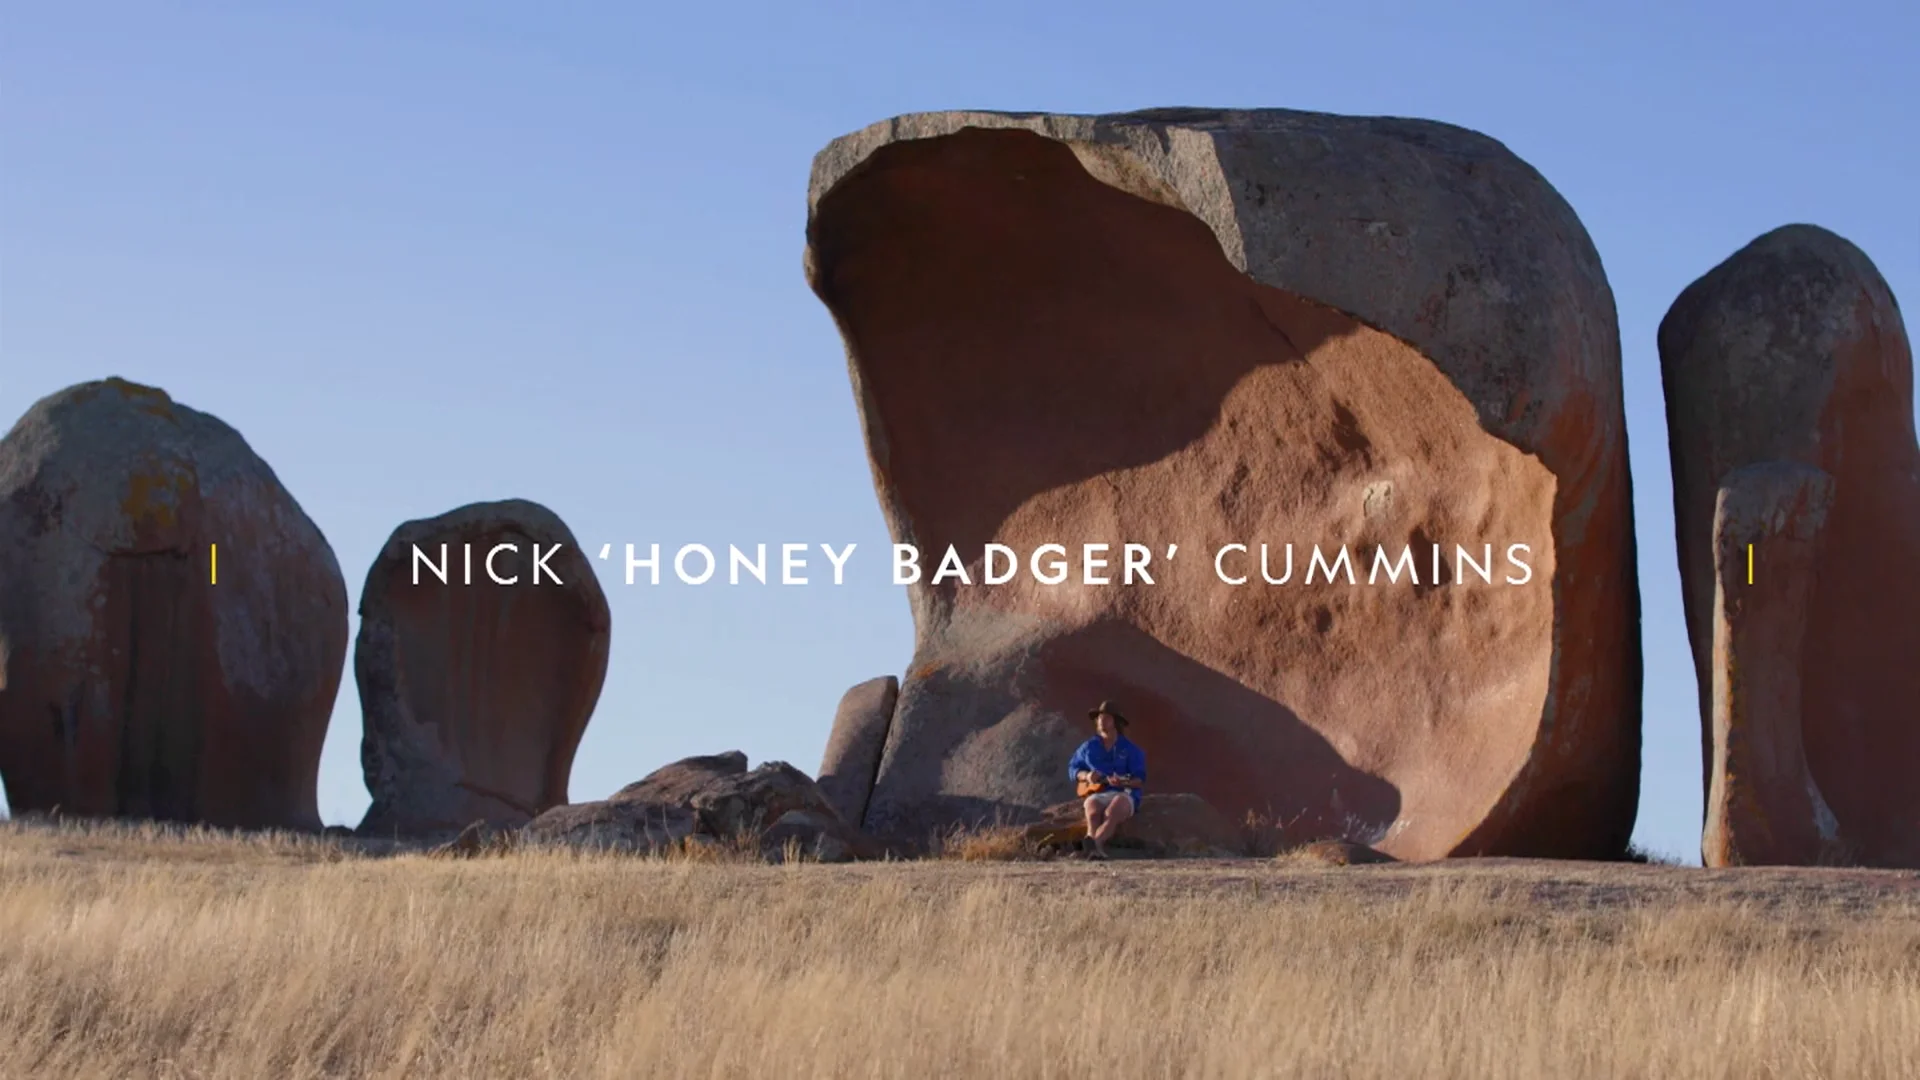 Meanwhile in Australia with Nick Cummins: Series Trailer - Nat Geo on Vimeo